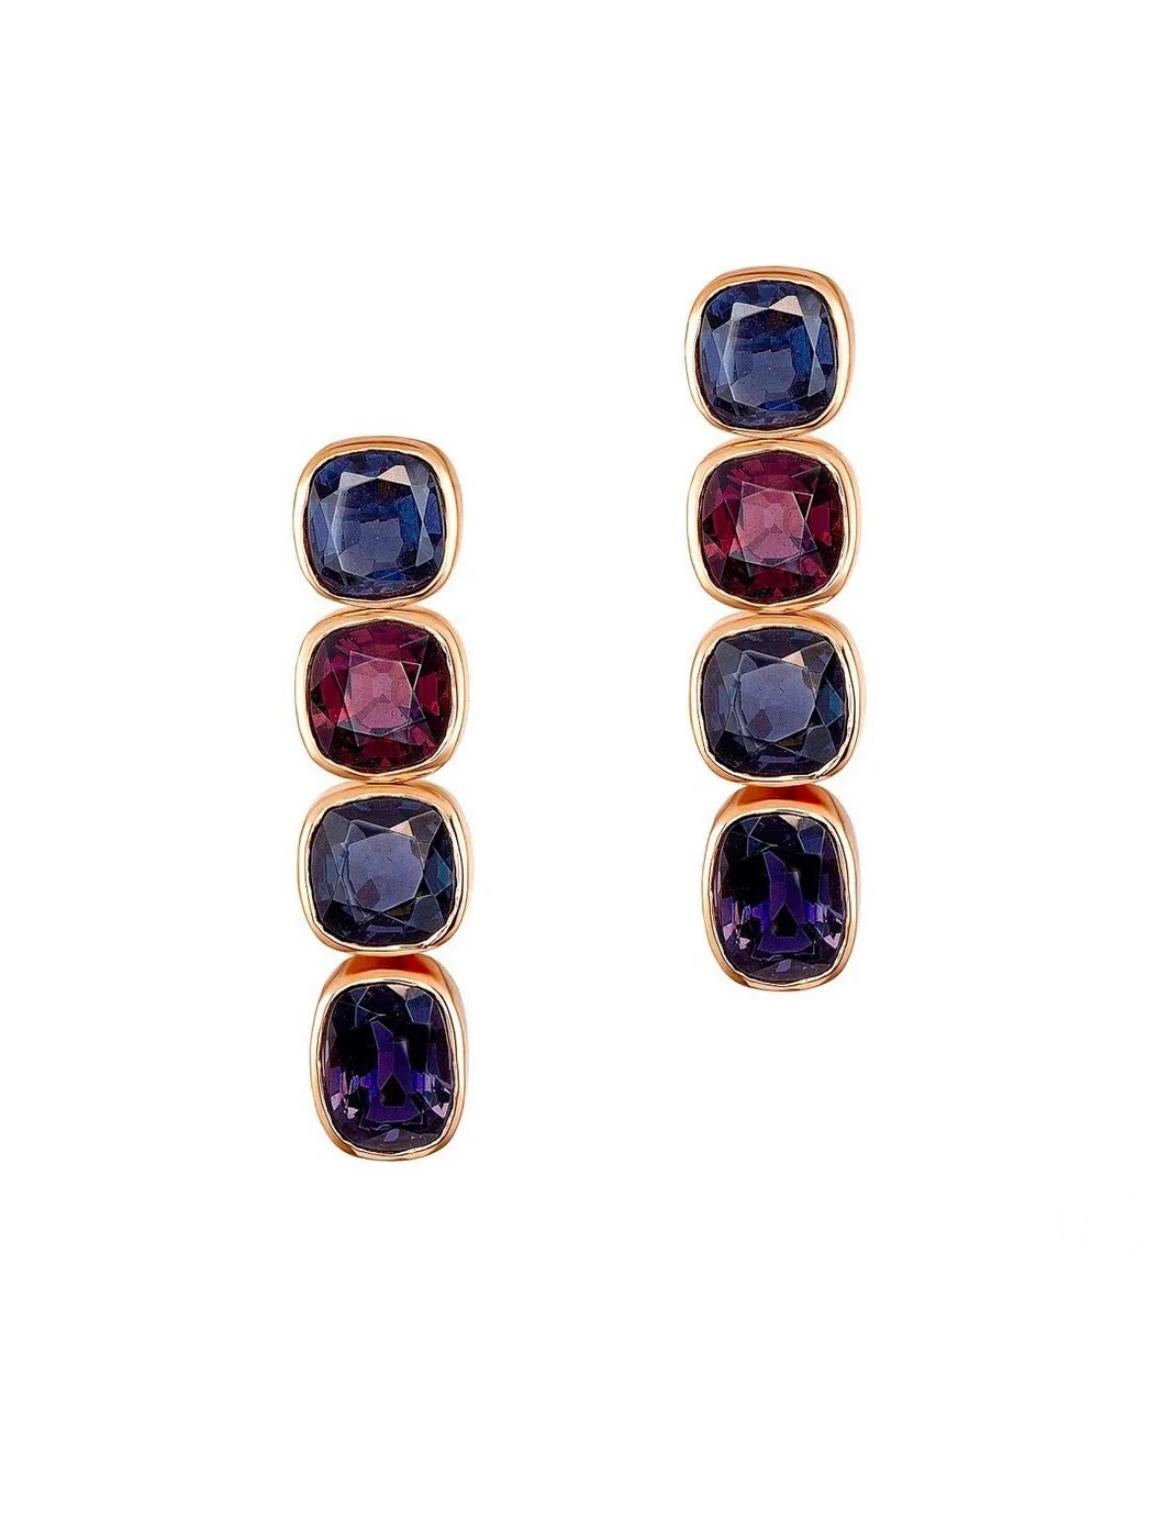 Cushion Burmese Spinel Earrings. 24.13 carats in 18K rose gold. For Sale